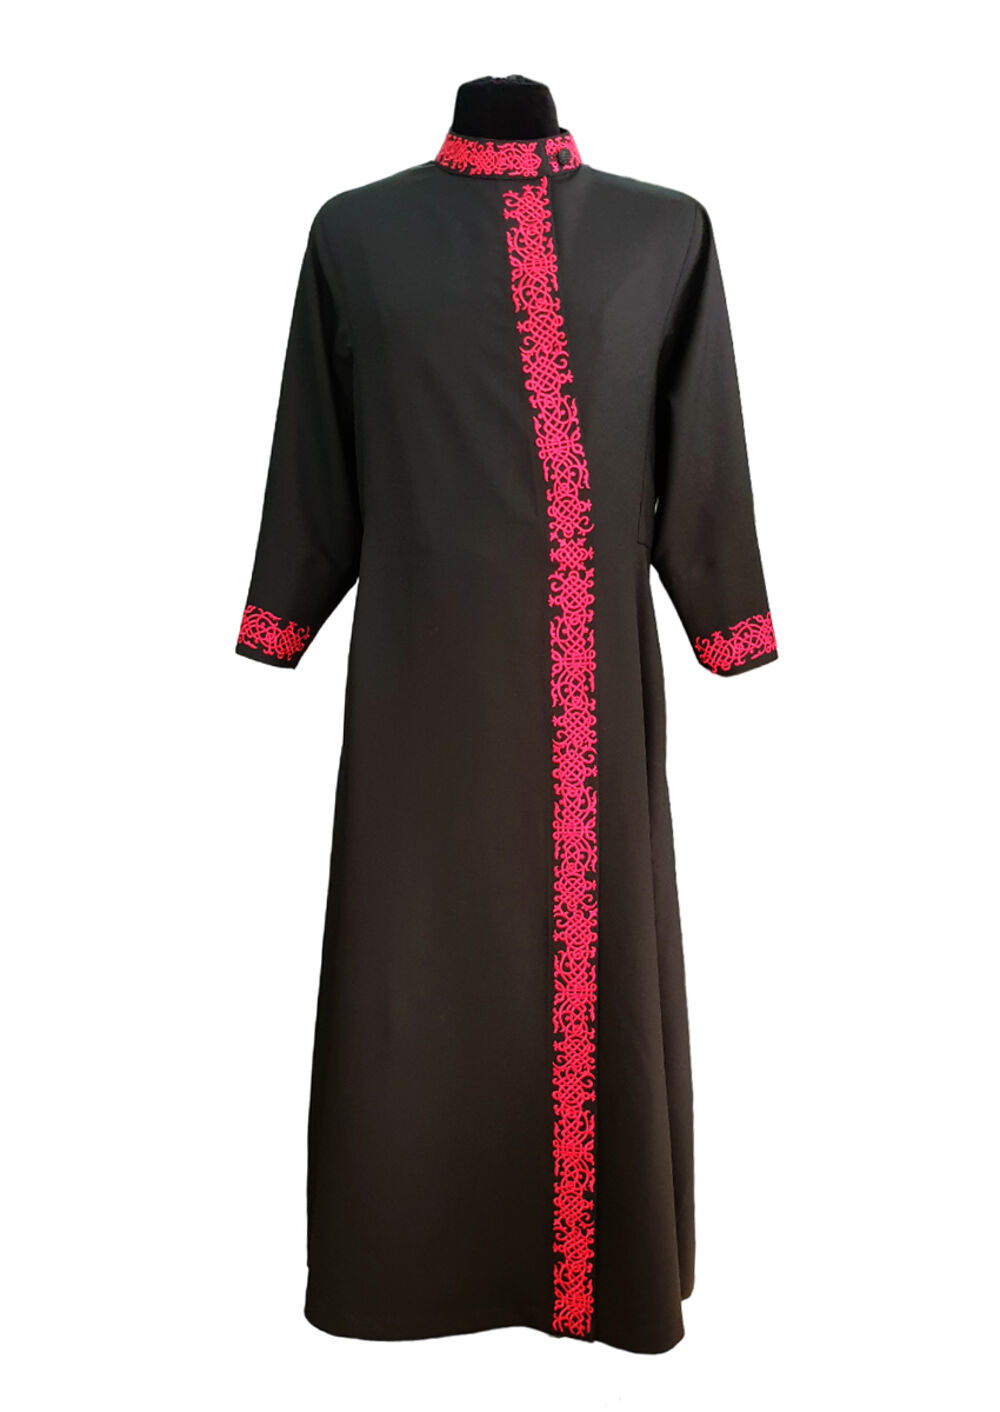 Men's cassock with embroidery